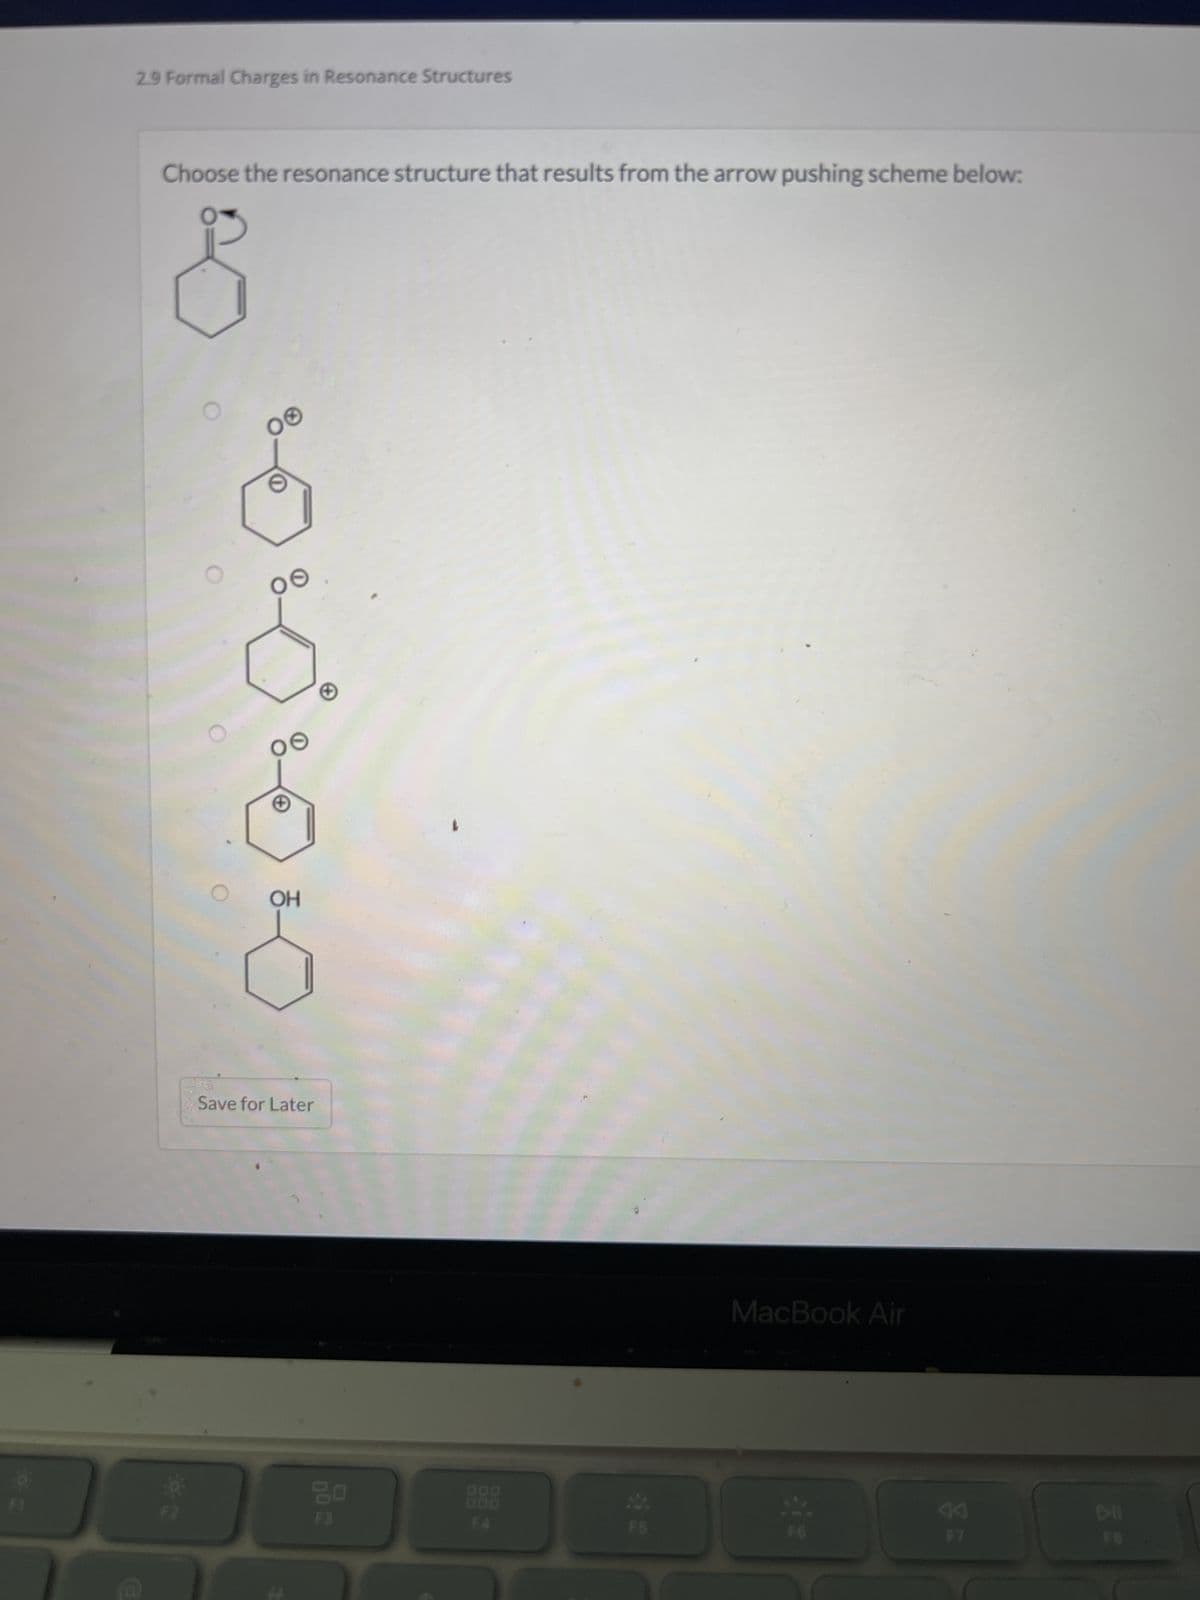 2.9 Formal Charges in Resonance Structures
Choose the resonance structure that results from the arrow pushing scheme below:
OO
00
+
OH
Save for Later
90
MacBook Air